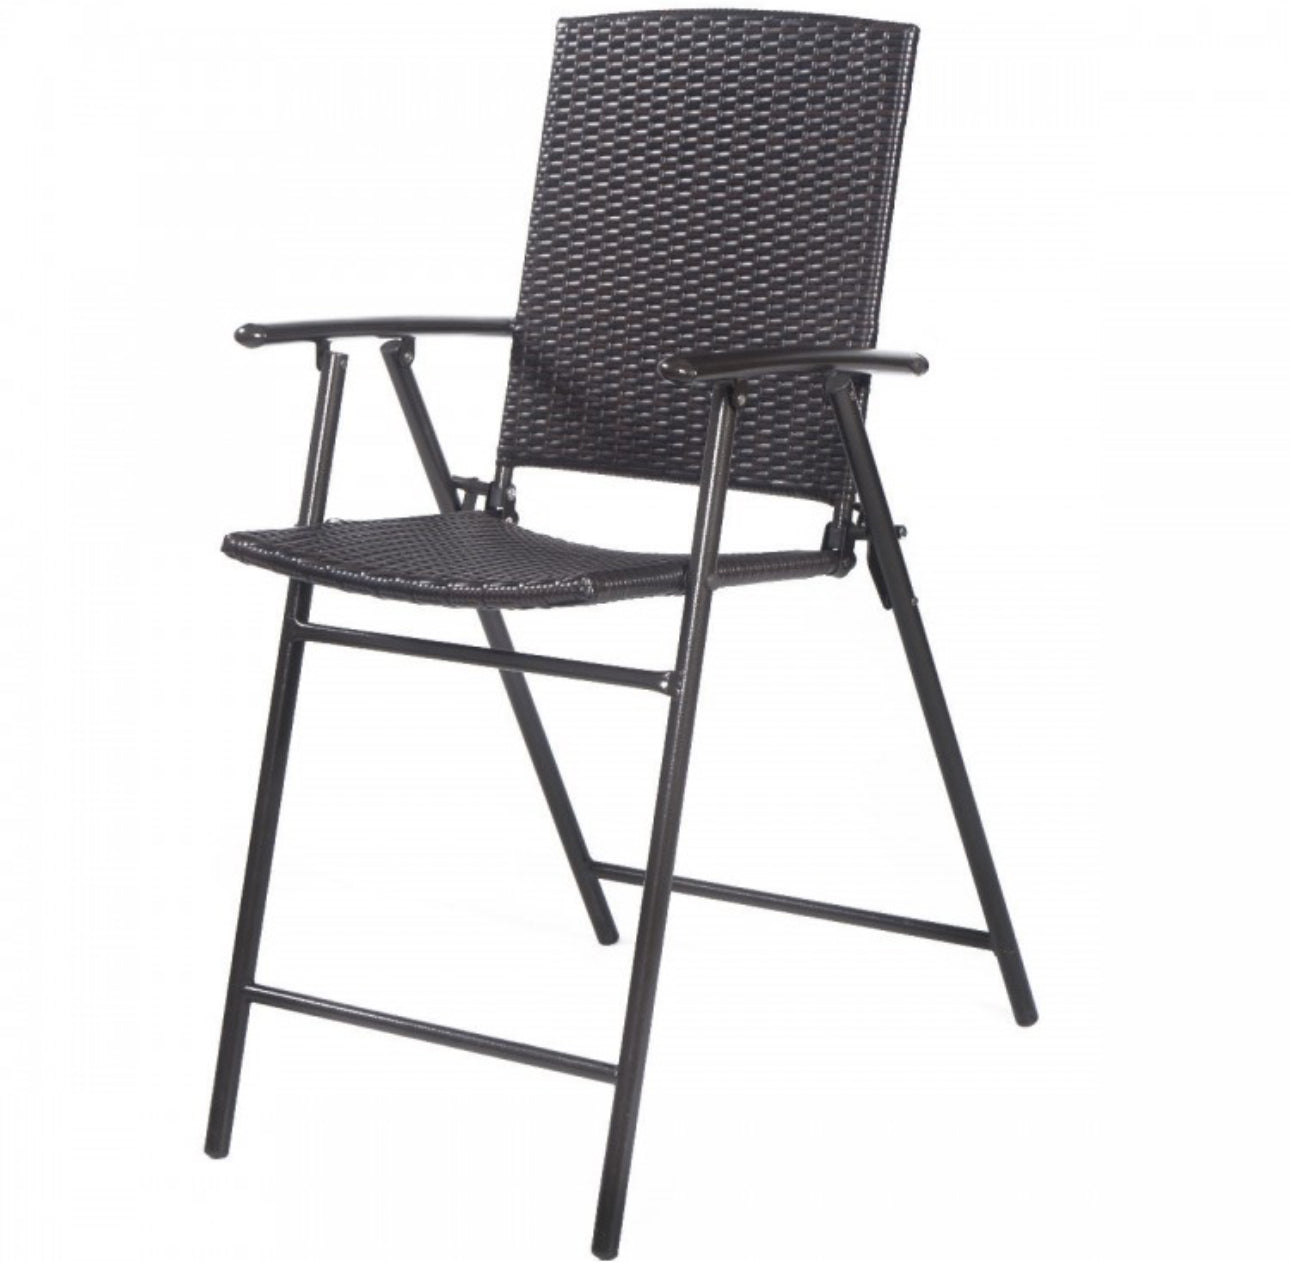 Super Duty Rattan Set Of 4 Folding Patio Chairs With Footrests | Armrests | Outdoors, Indoors | Holds 264 lbs | Steel Frame